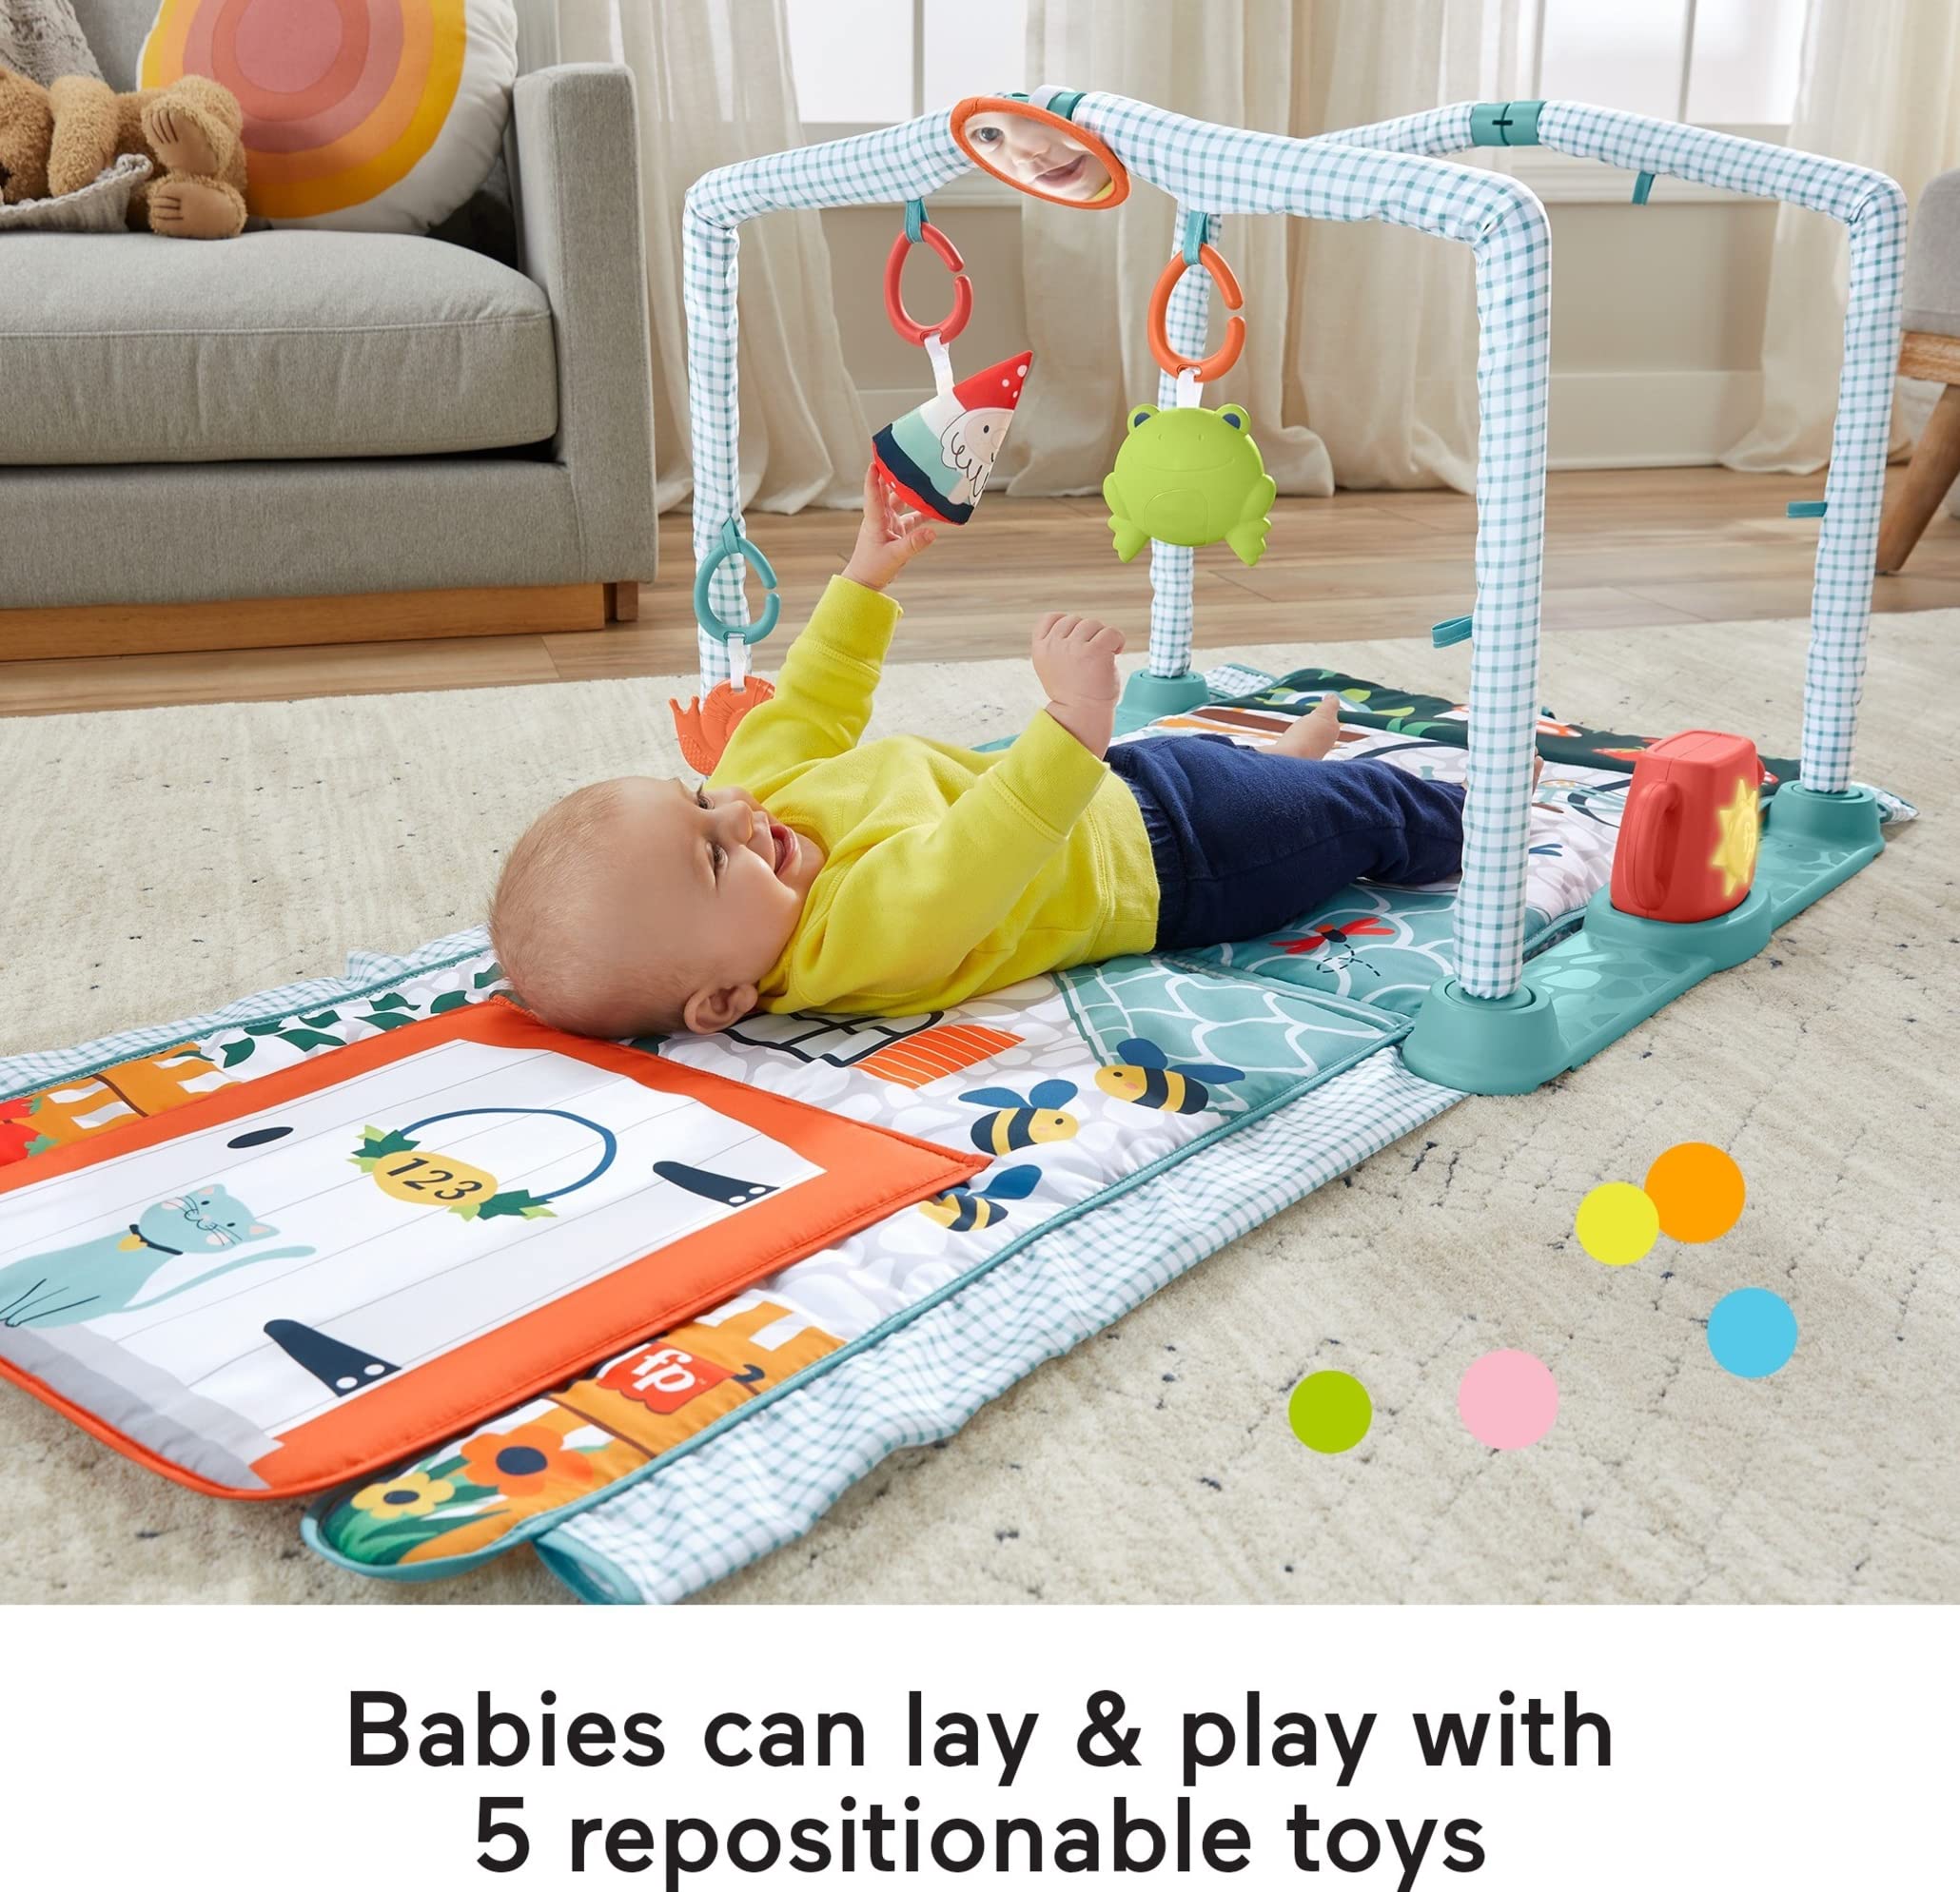 Fisher-Price Playmat 3-In-1 Crawl & Play Activity Gym With 5 Baby Toys For Newborn To Toddler Sensory & Fine Motor Play